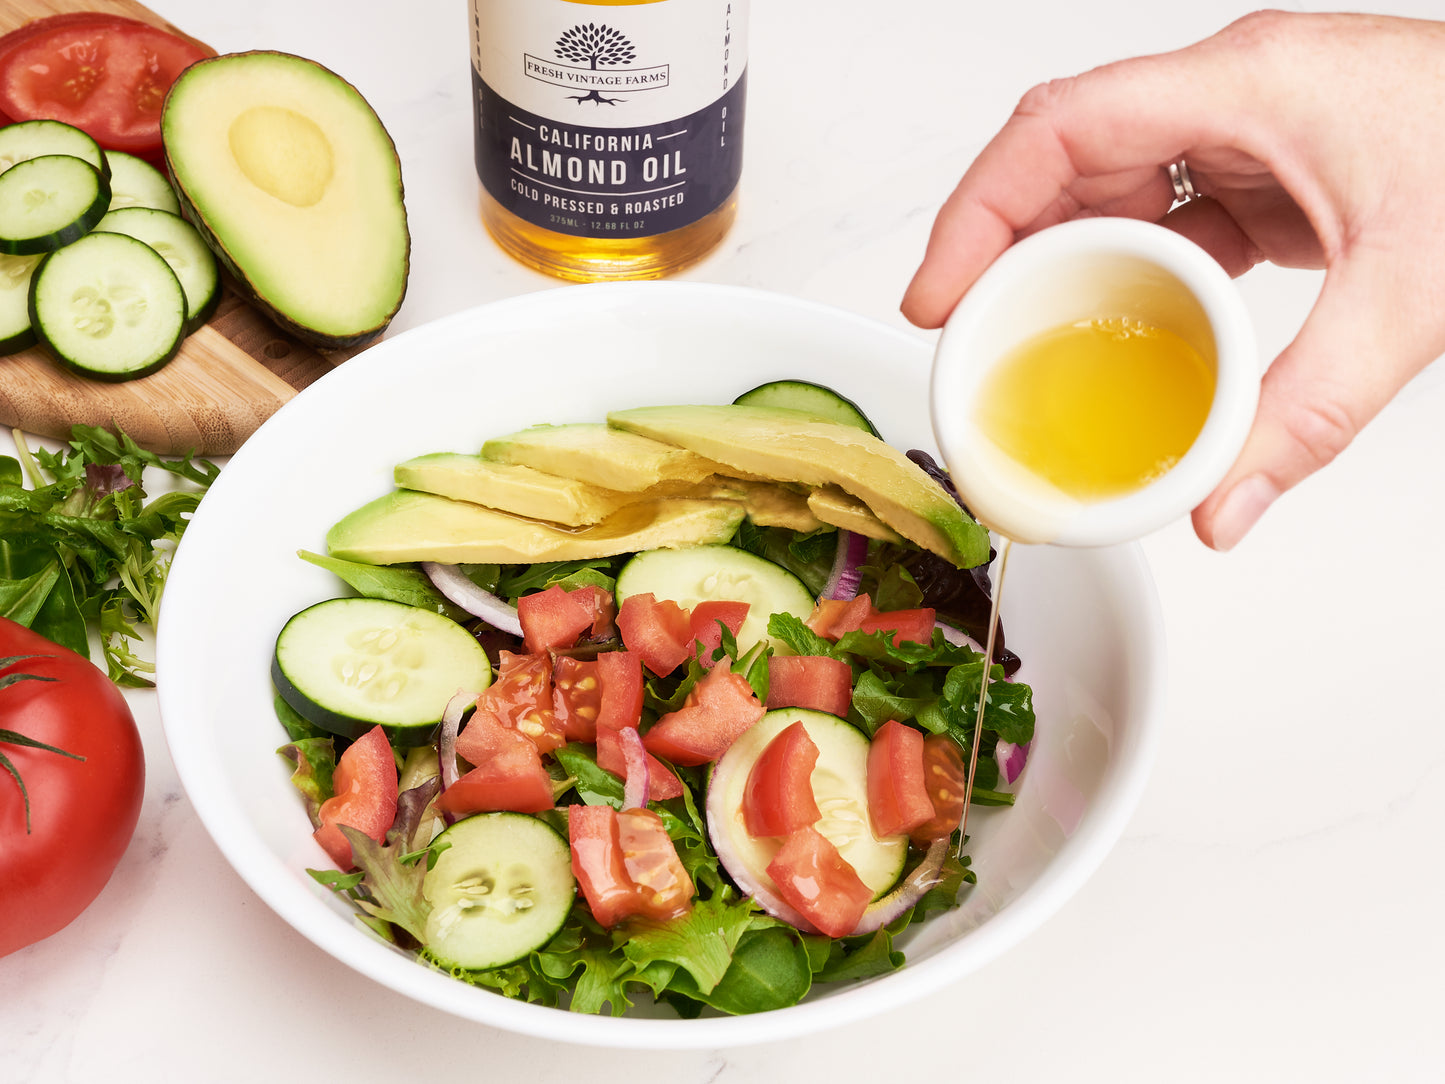 Try Fresh Vintage Farms cold pressed & roasted almond oil as a stand alone salad dressing or pair it with your favorite balsamic. Our Almond Oil inherently has a nutty flavor, which is a great complement to your salad creations.